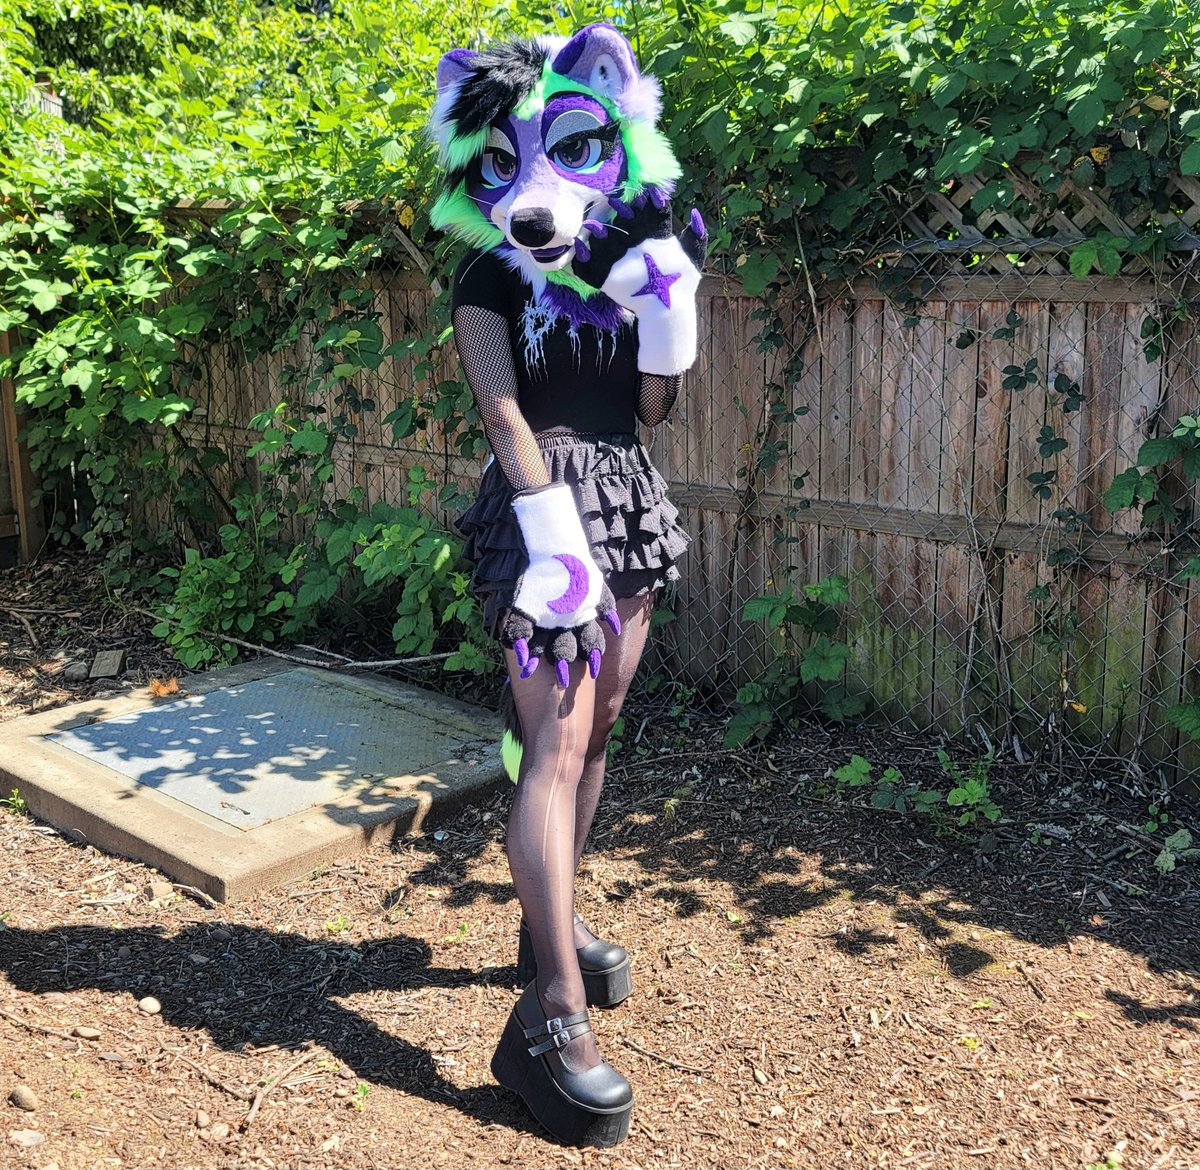 Raccoon premade for #furlandia2024 🫶💜🌙⭐️ Ill be in the dealers den! who will I see there?
#raccoonfursuit #fursuitmaker #raccoonfurry #fursuitmaking #furryartist